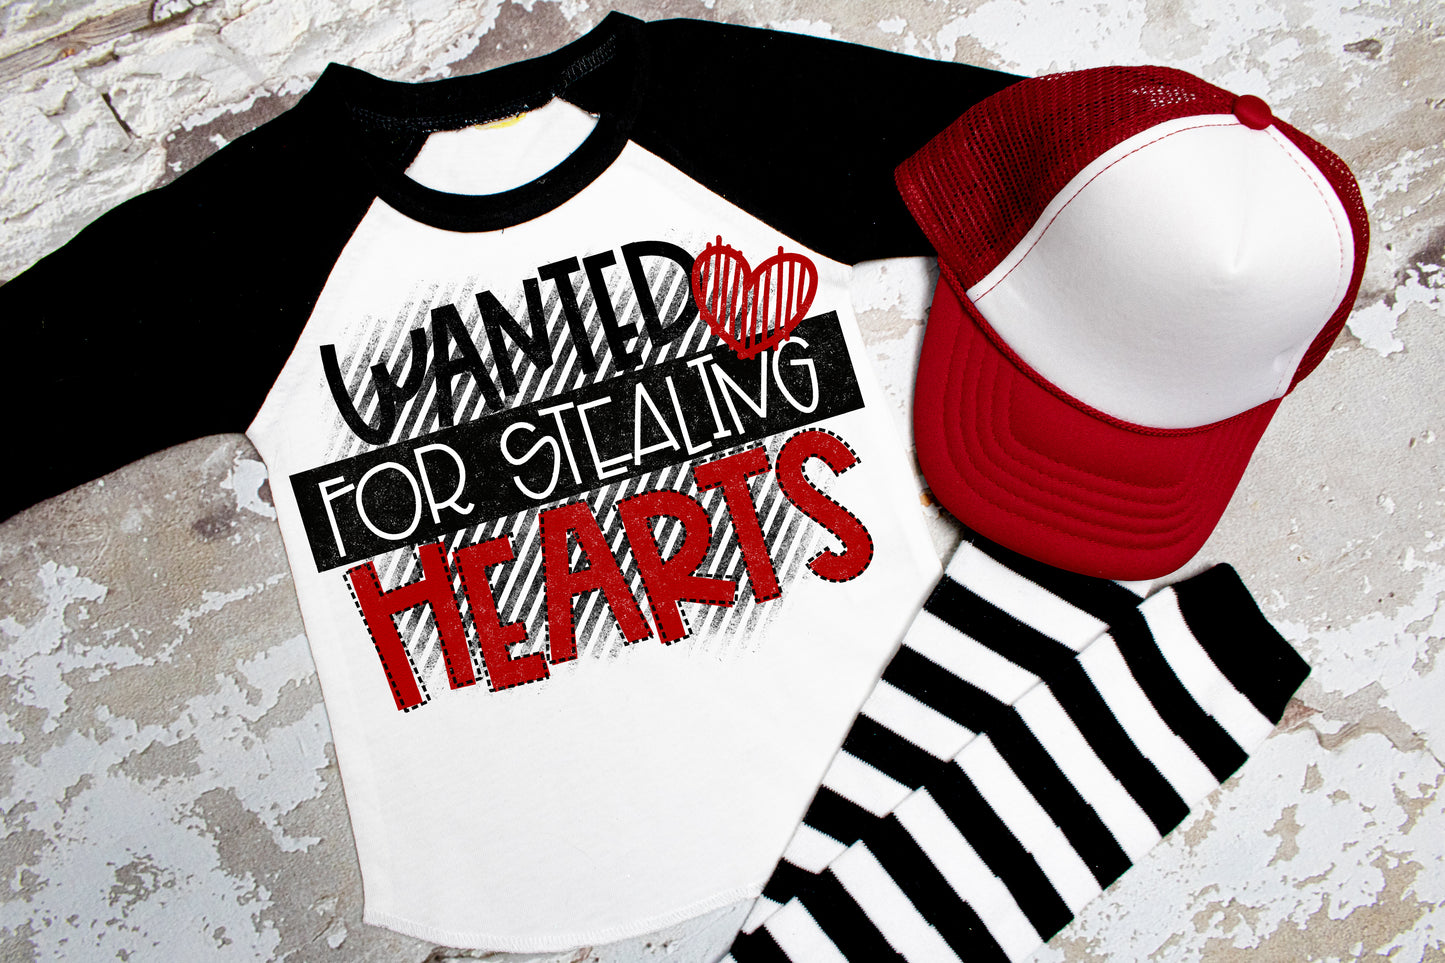 Wanted for Stealing Hearts. Boys Valentine Shirt